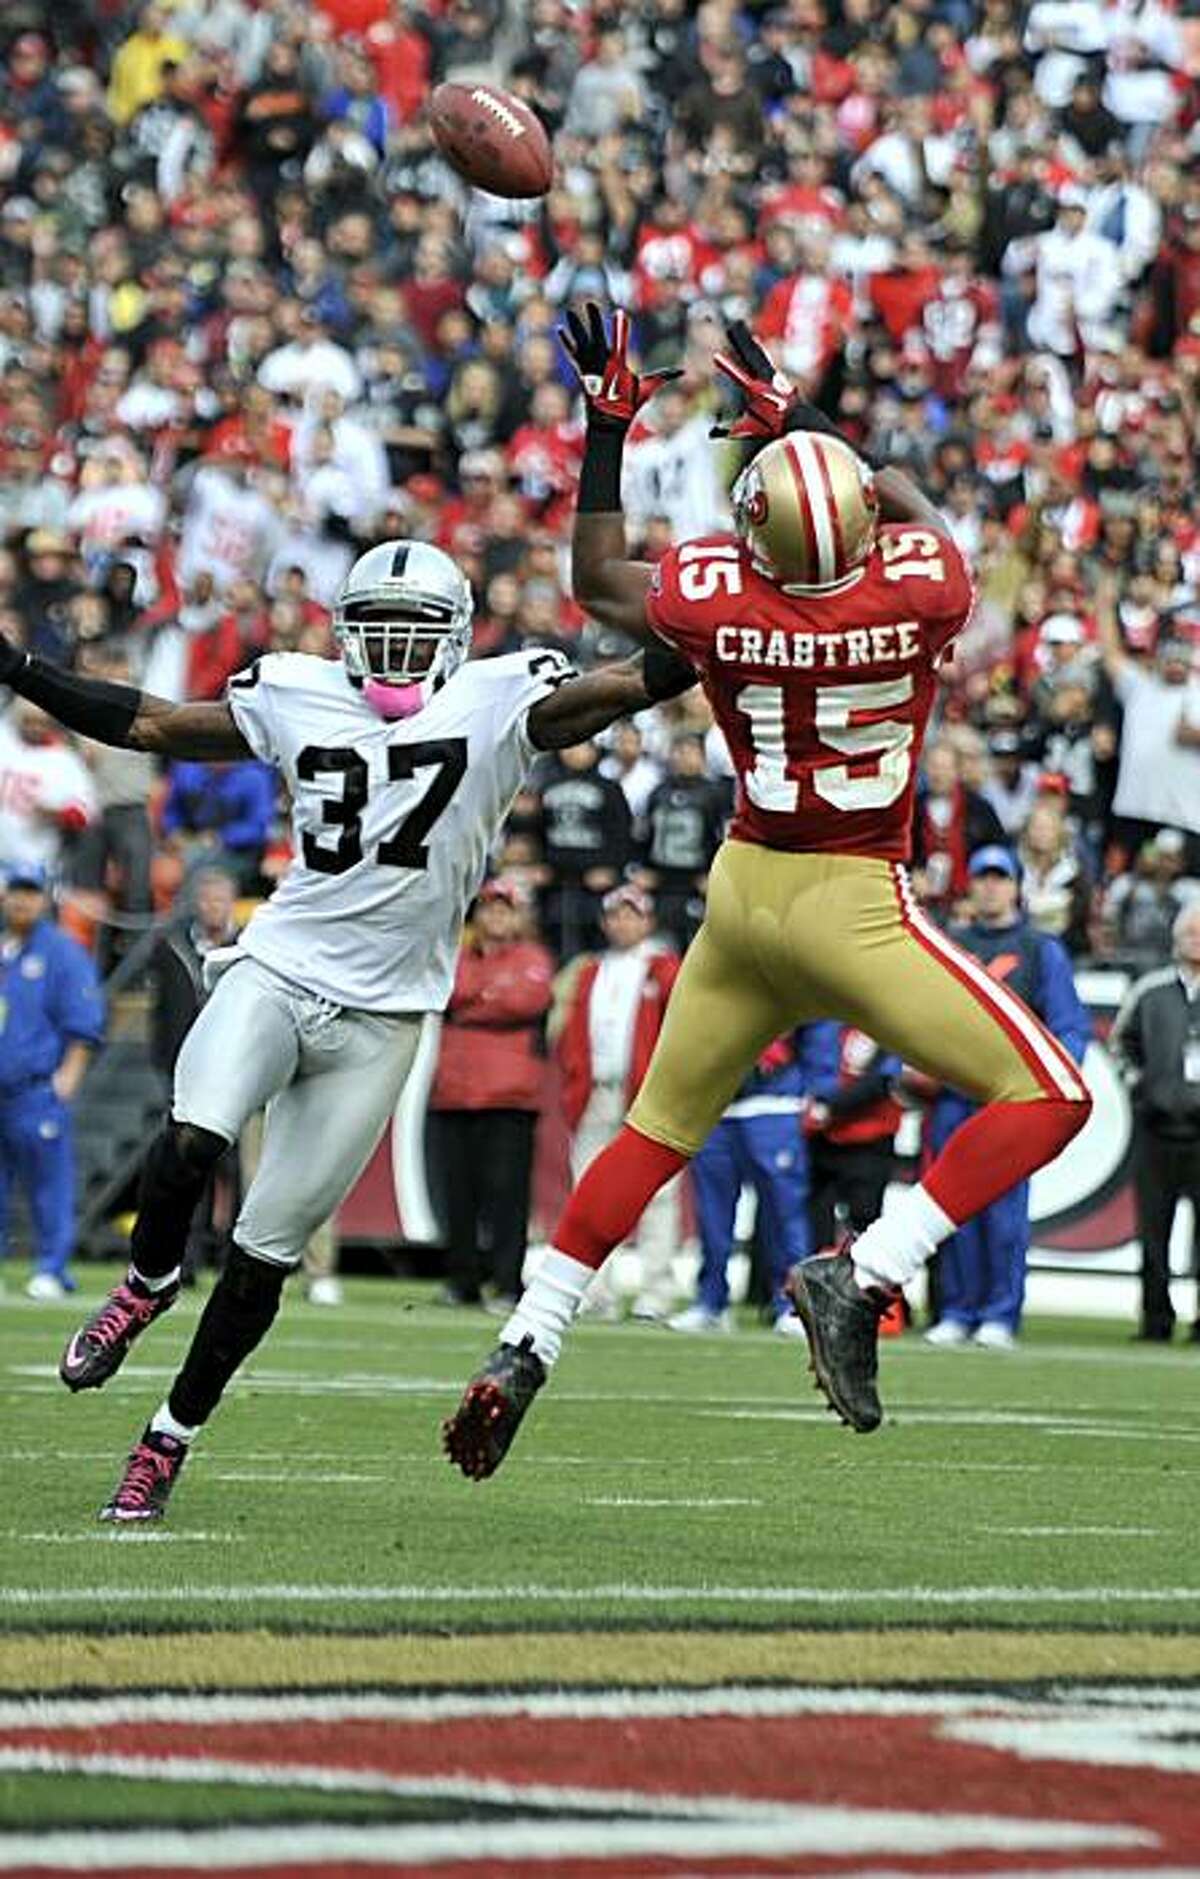 Michael Crabtree makes the catch to give the 49ers their first touchdown against the Oakland Raiders at Candlestick Park on Sunday.